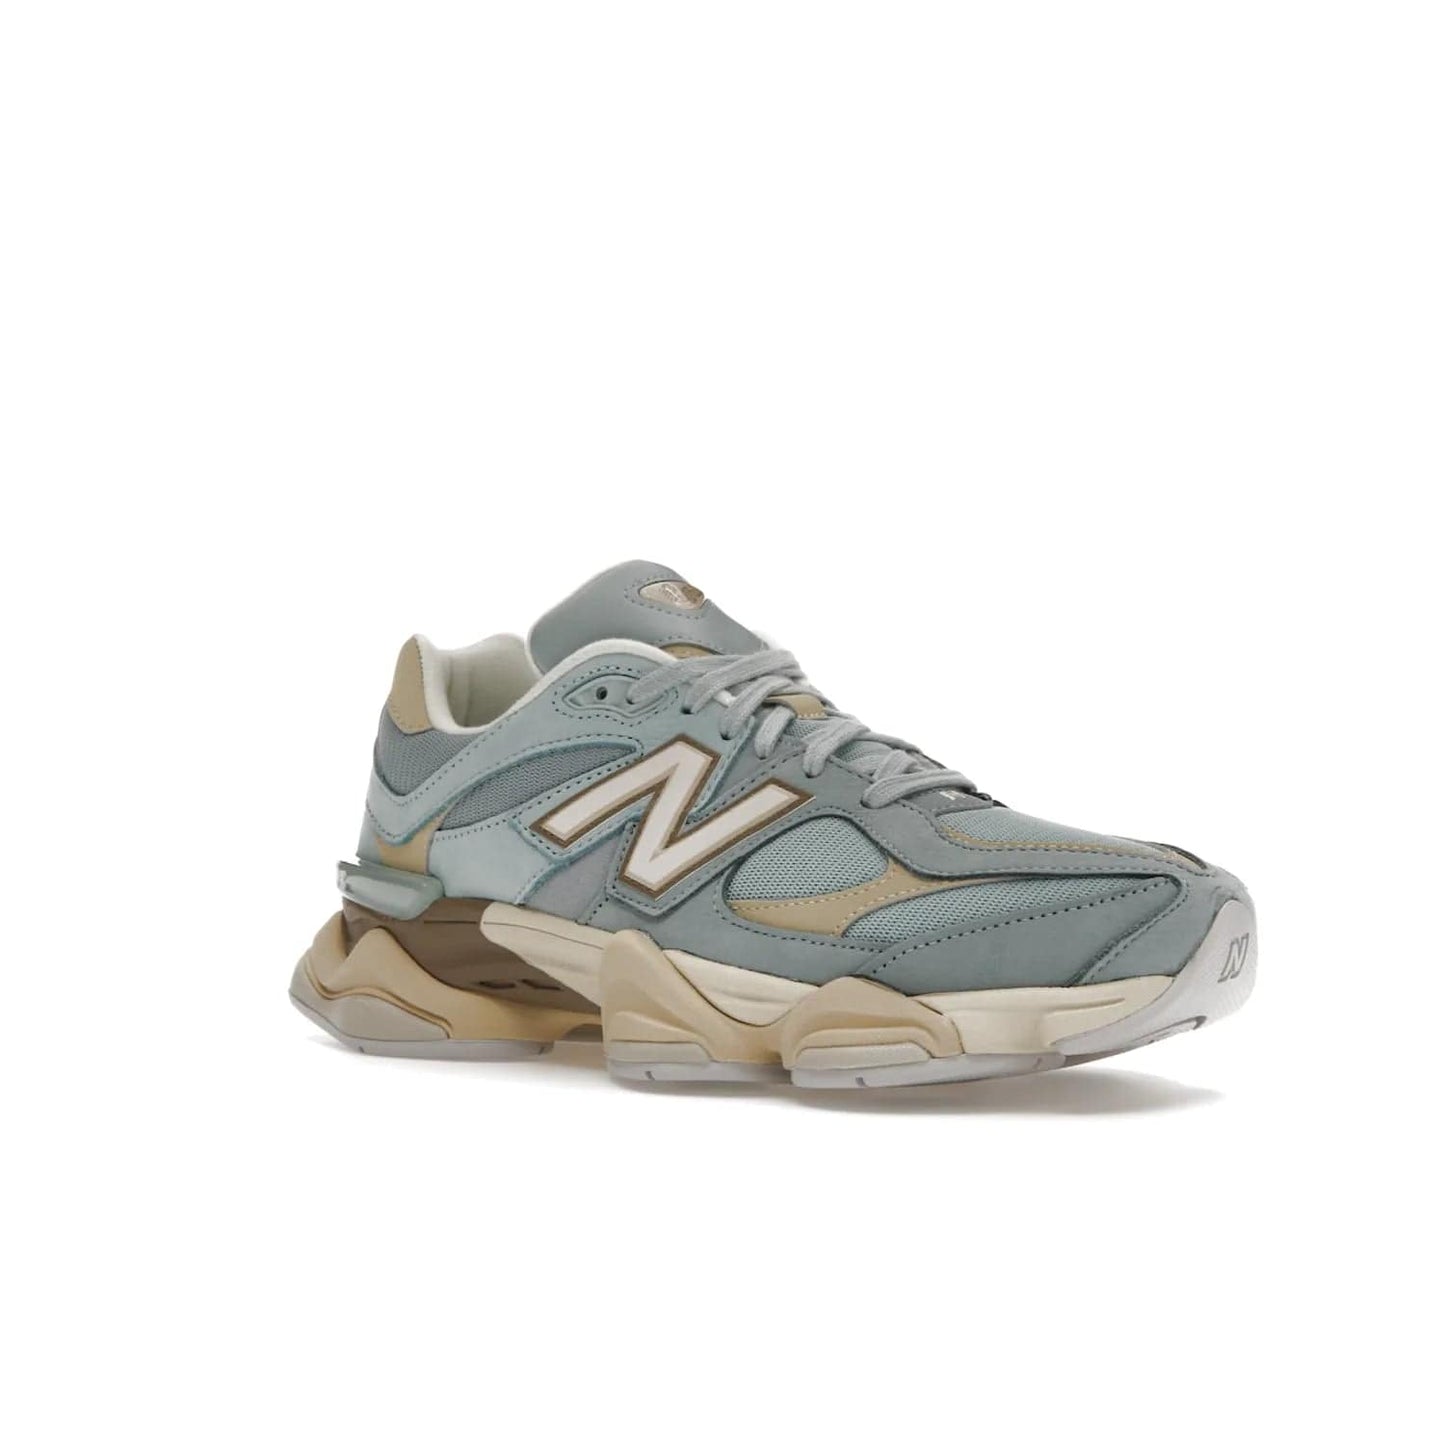 New Balance 9060 Blue Haze - Image 5 - Only at www.BallersClubKickz.com - The New Balance 9060 Blue Haze combines blue haze and beige colors to create a classic silhouette. Breathable upper, EVA and rubber midsole, rubber outsole, and "N" branding complete the design. Released February 3, 2023.